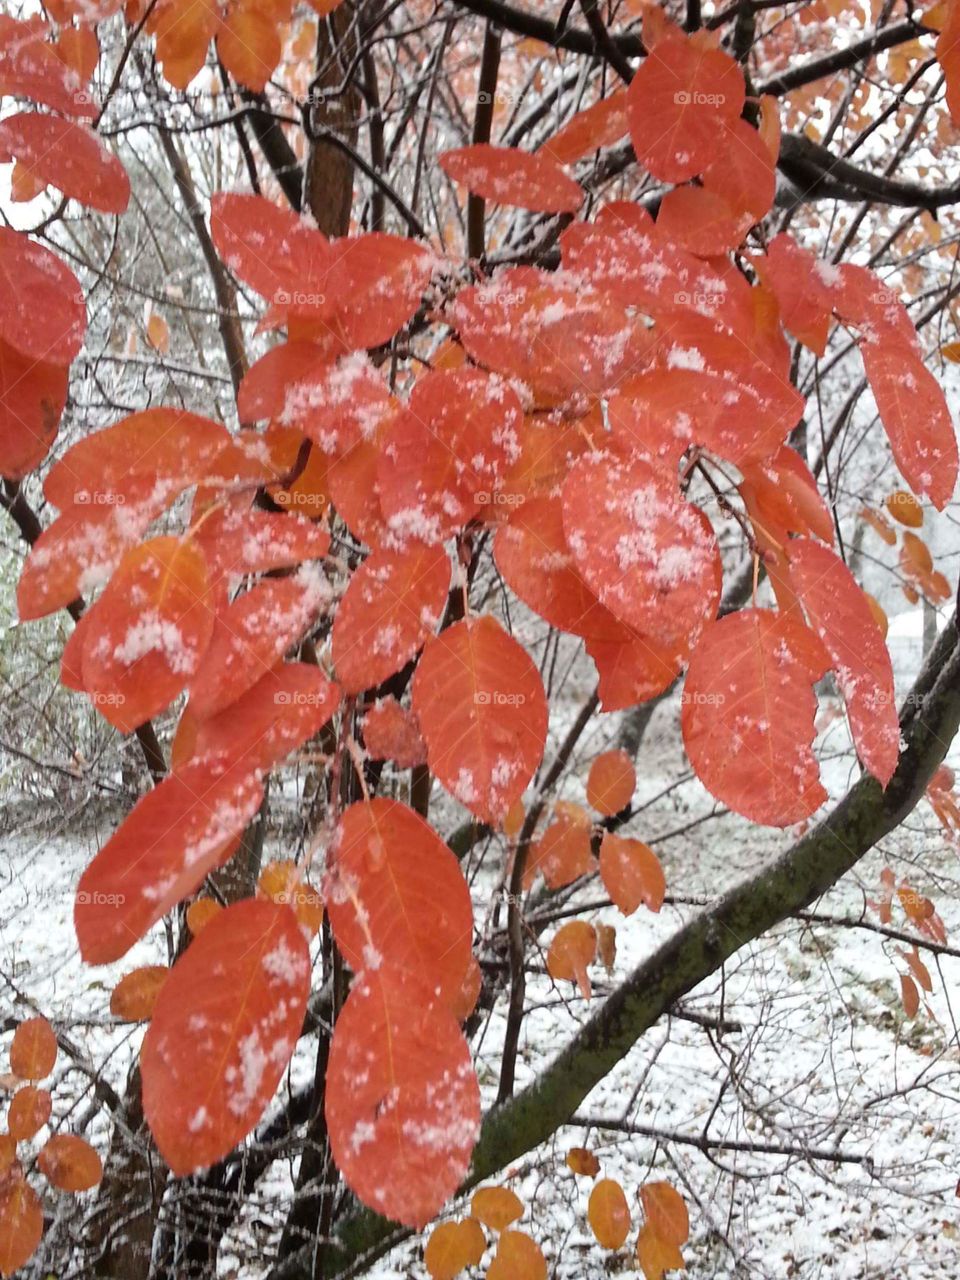 orange leaves after the first snow